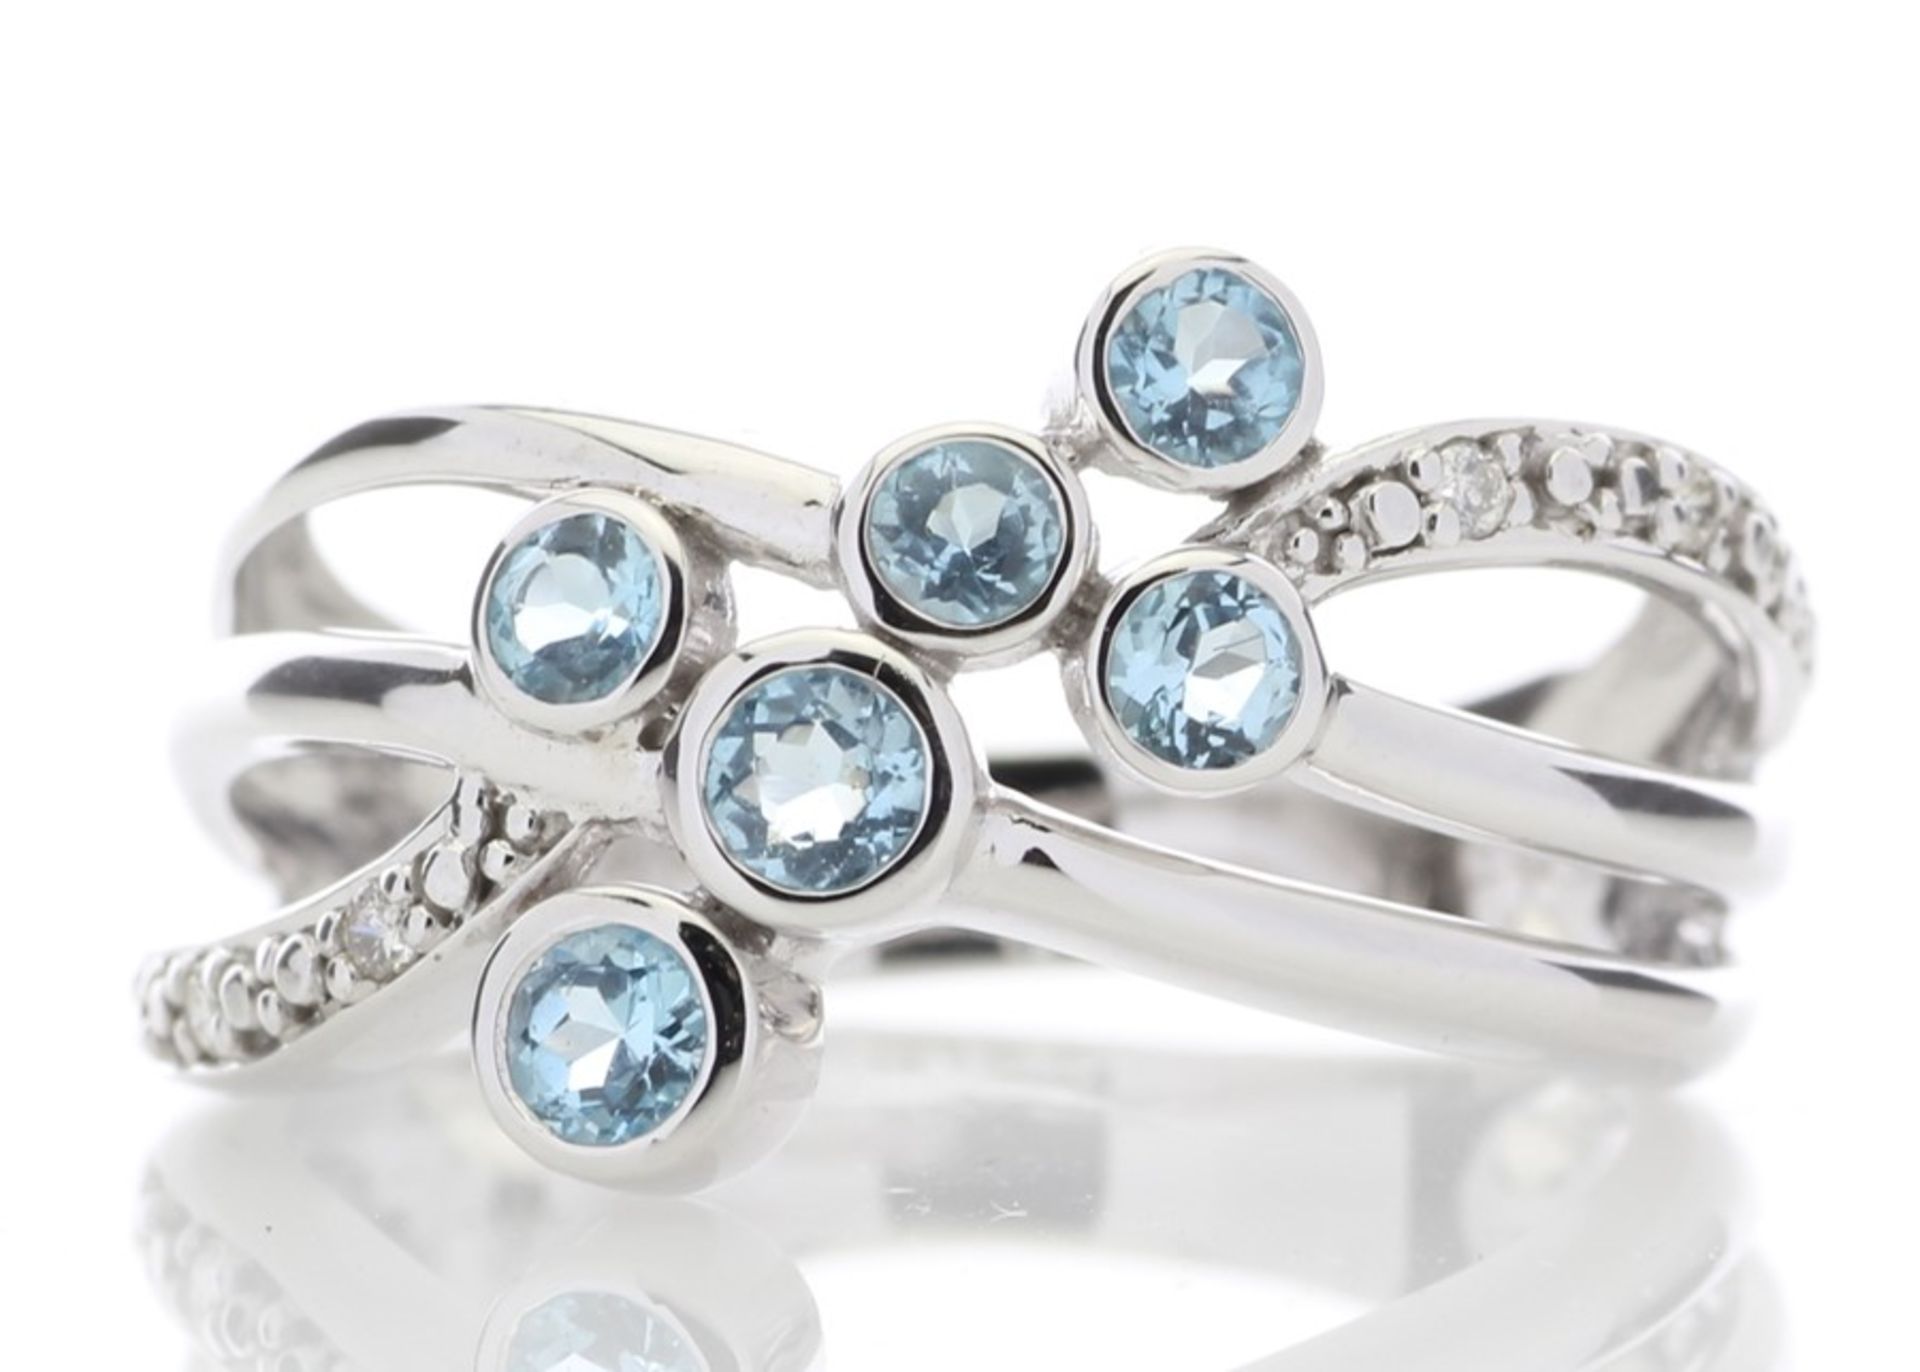 Valued by GIE £905.00 - 9ct White Gold Fancy Cluster Diamond Blue Topaz Ring 0.10 Carats - 8180046L,